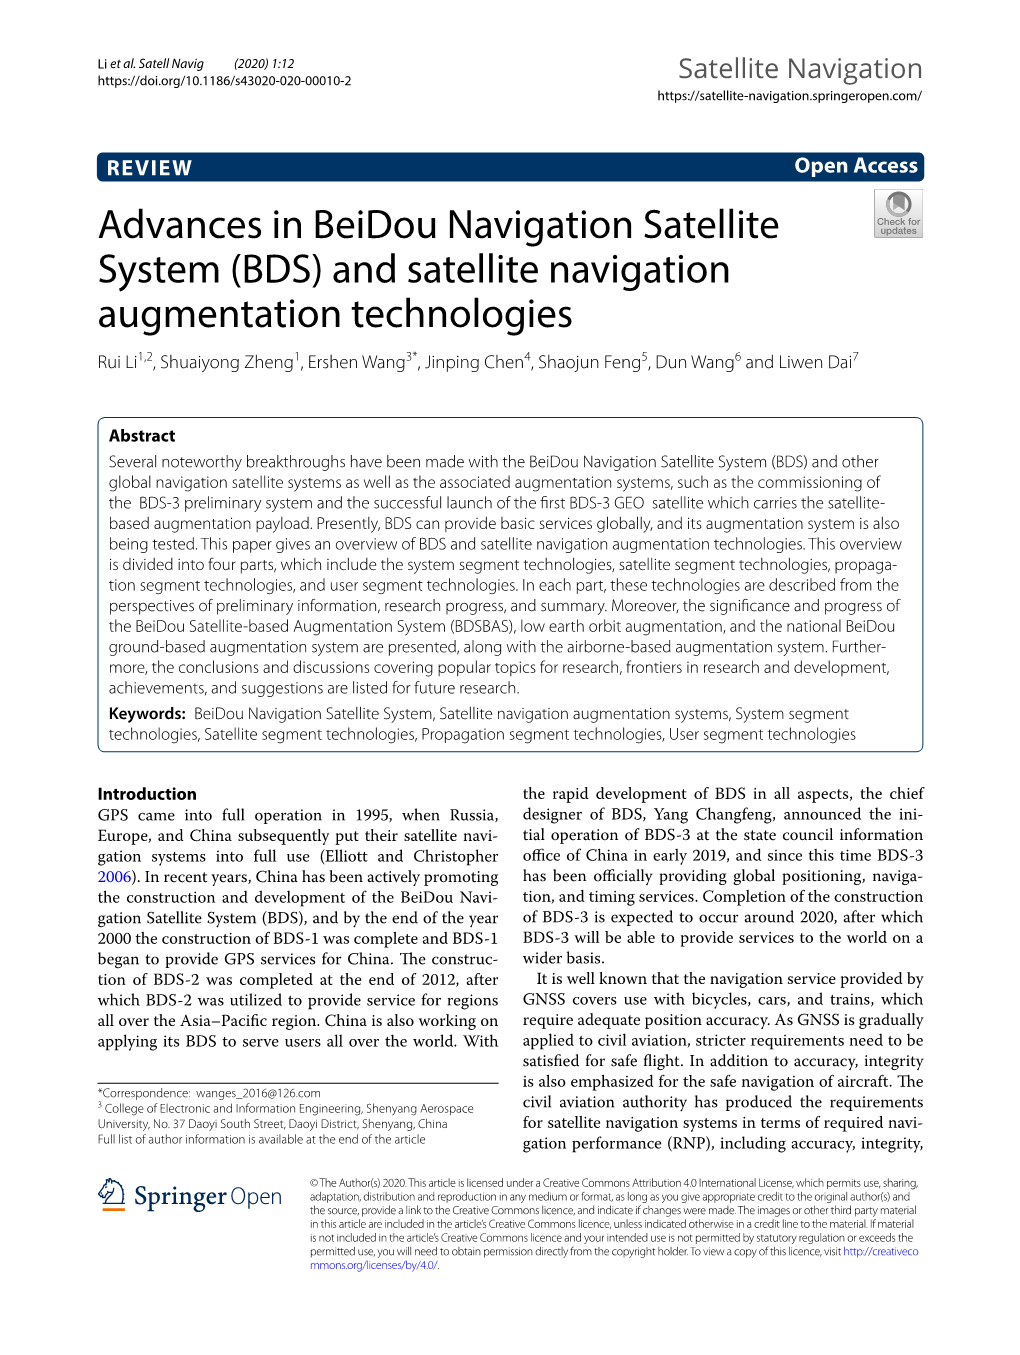 Advances in Beidou Navigation Satellite System (BDS) and Satellite